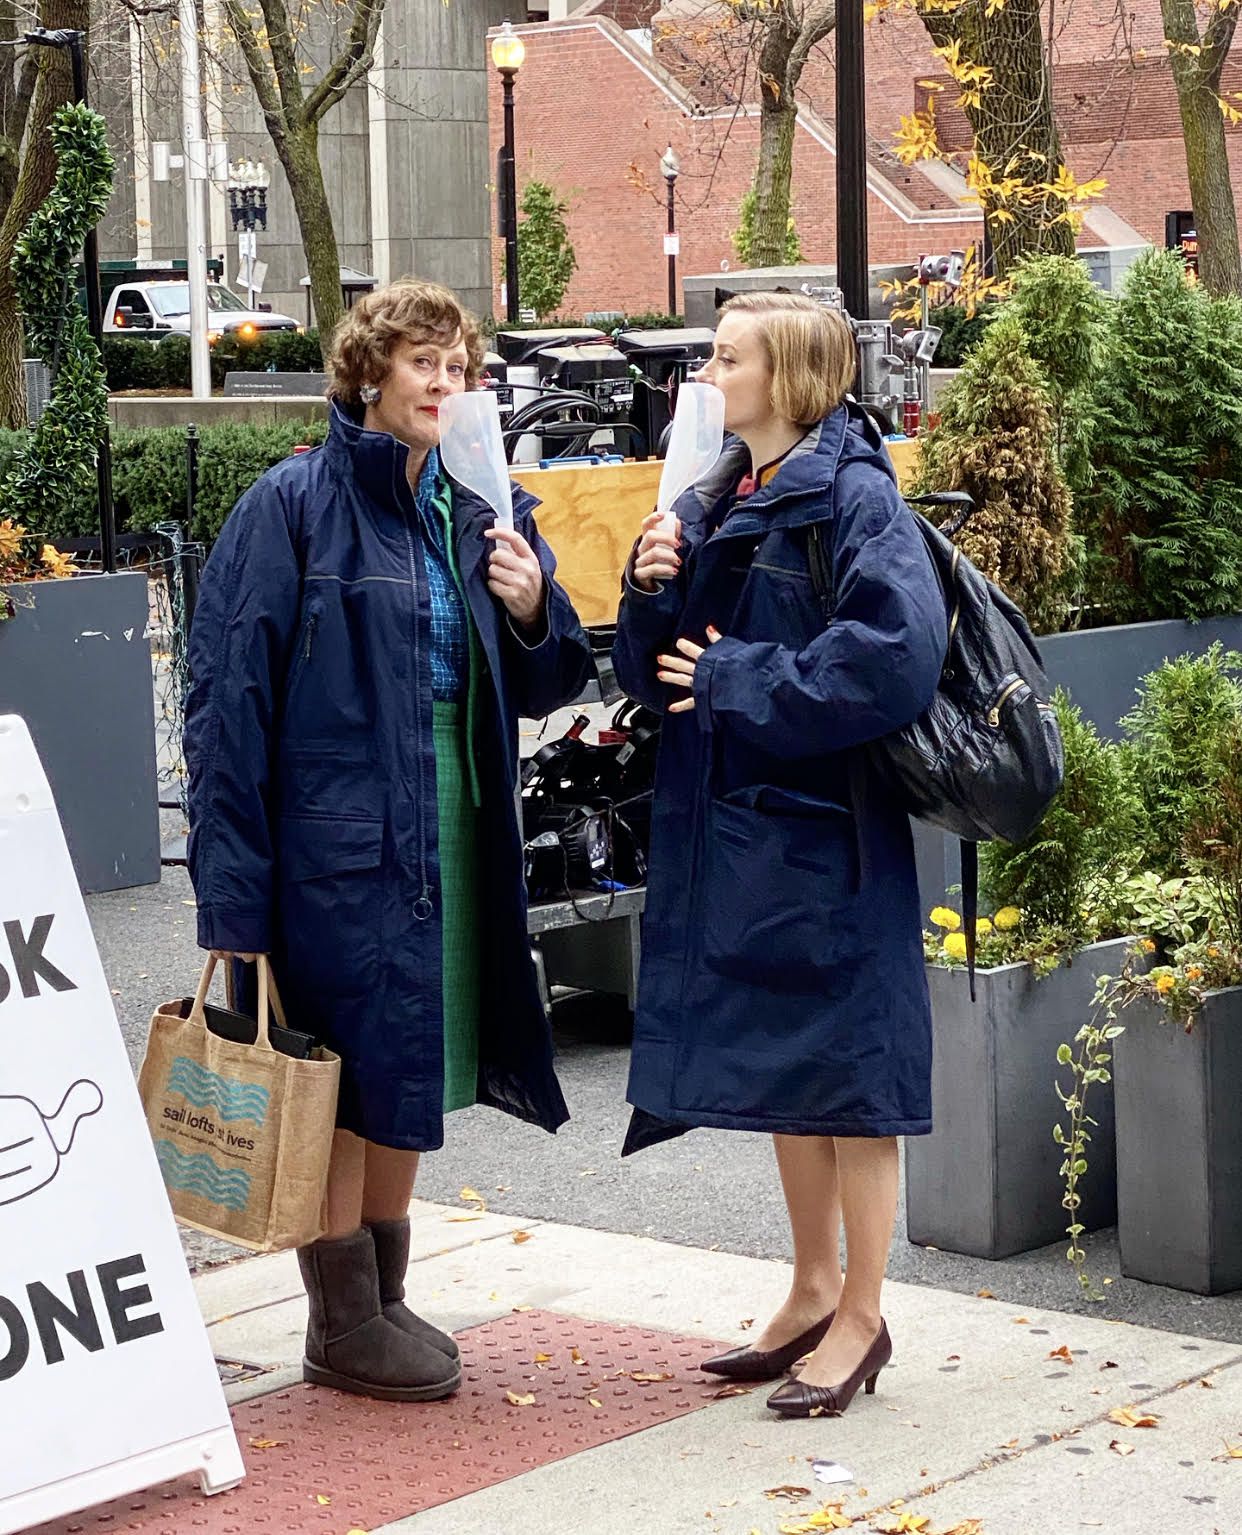 Sarah Lancashire transforms into Julia Child in a new HBO Max series : NPR